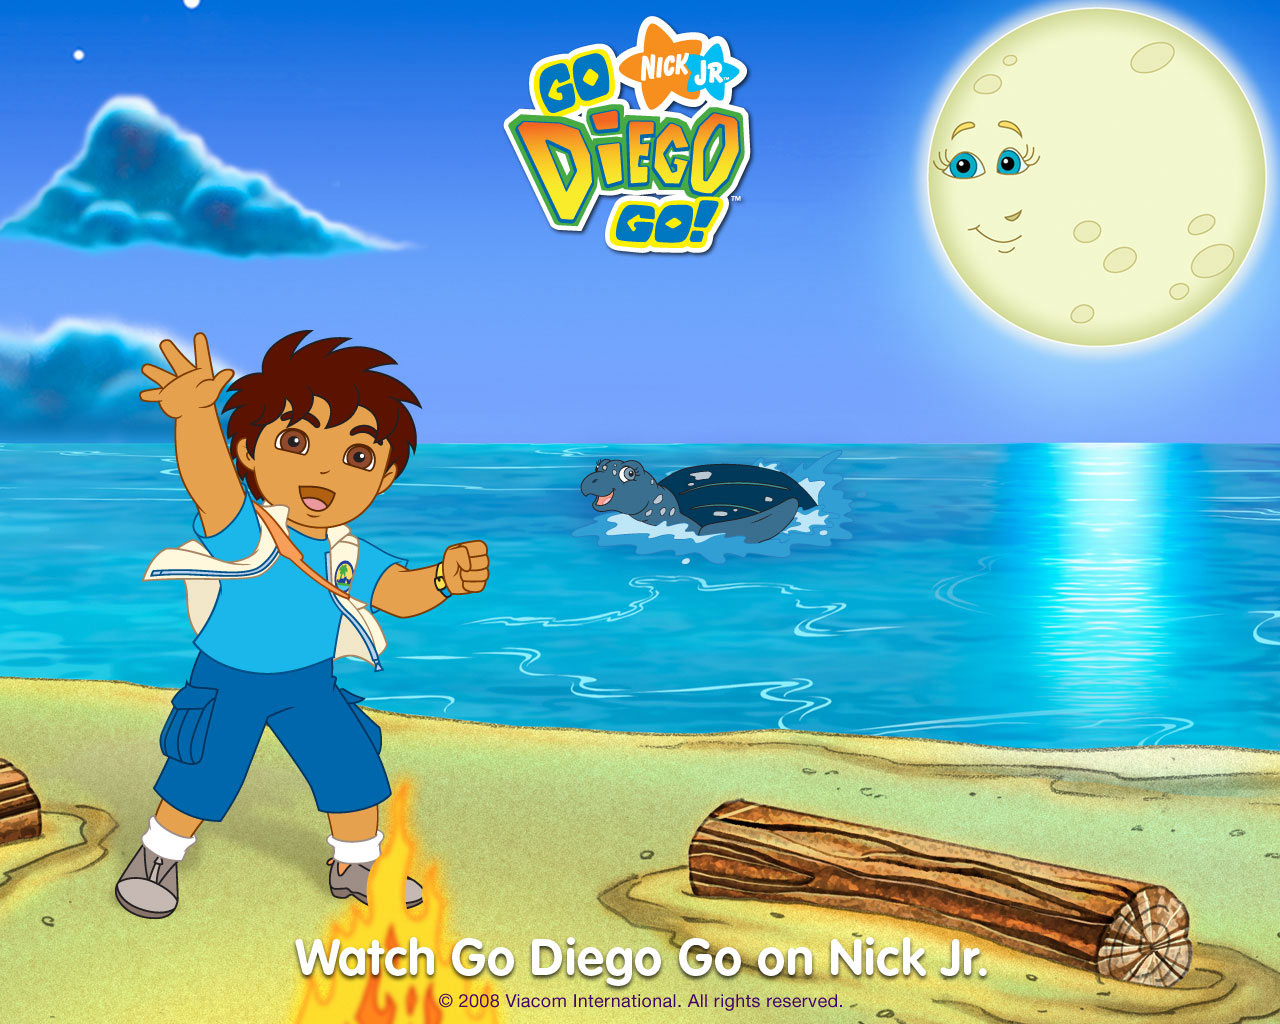  Go Diego Go images and pictures   computer Go Diego Go wallpaper   Go